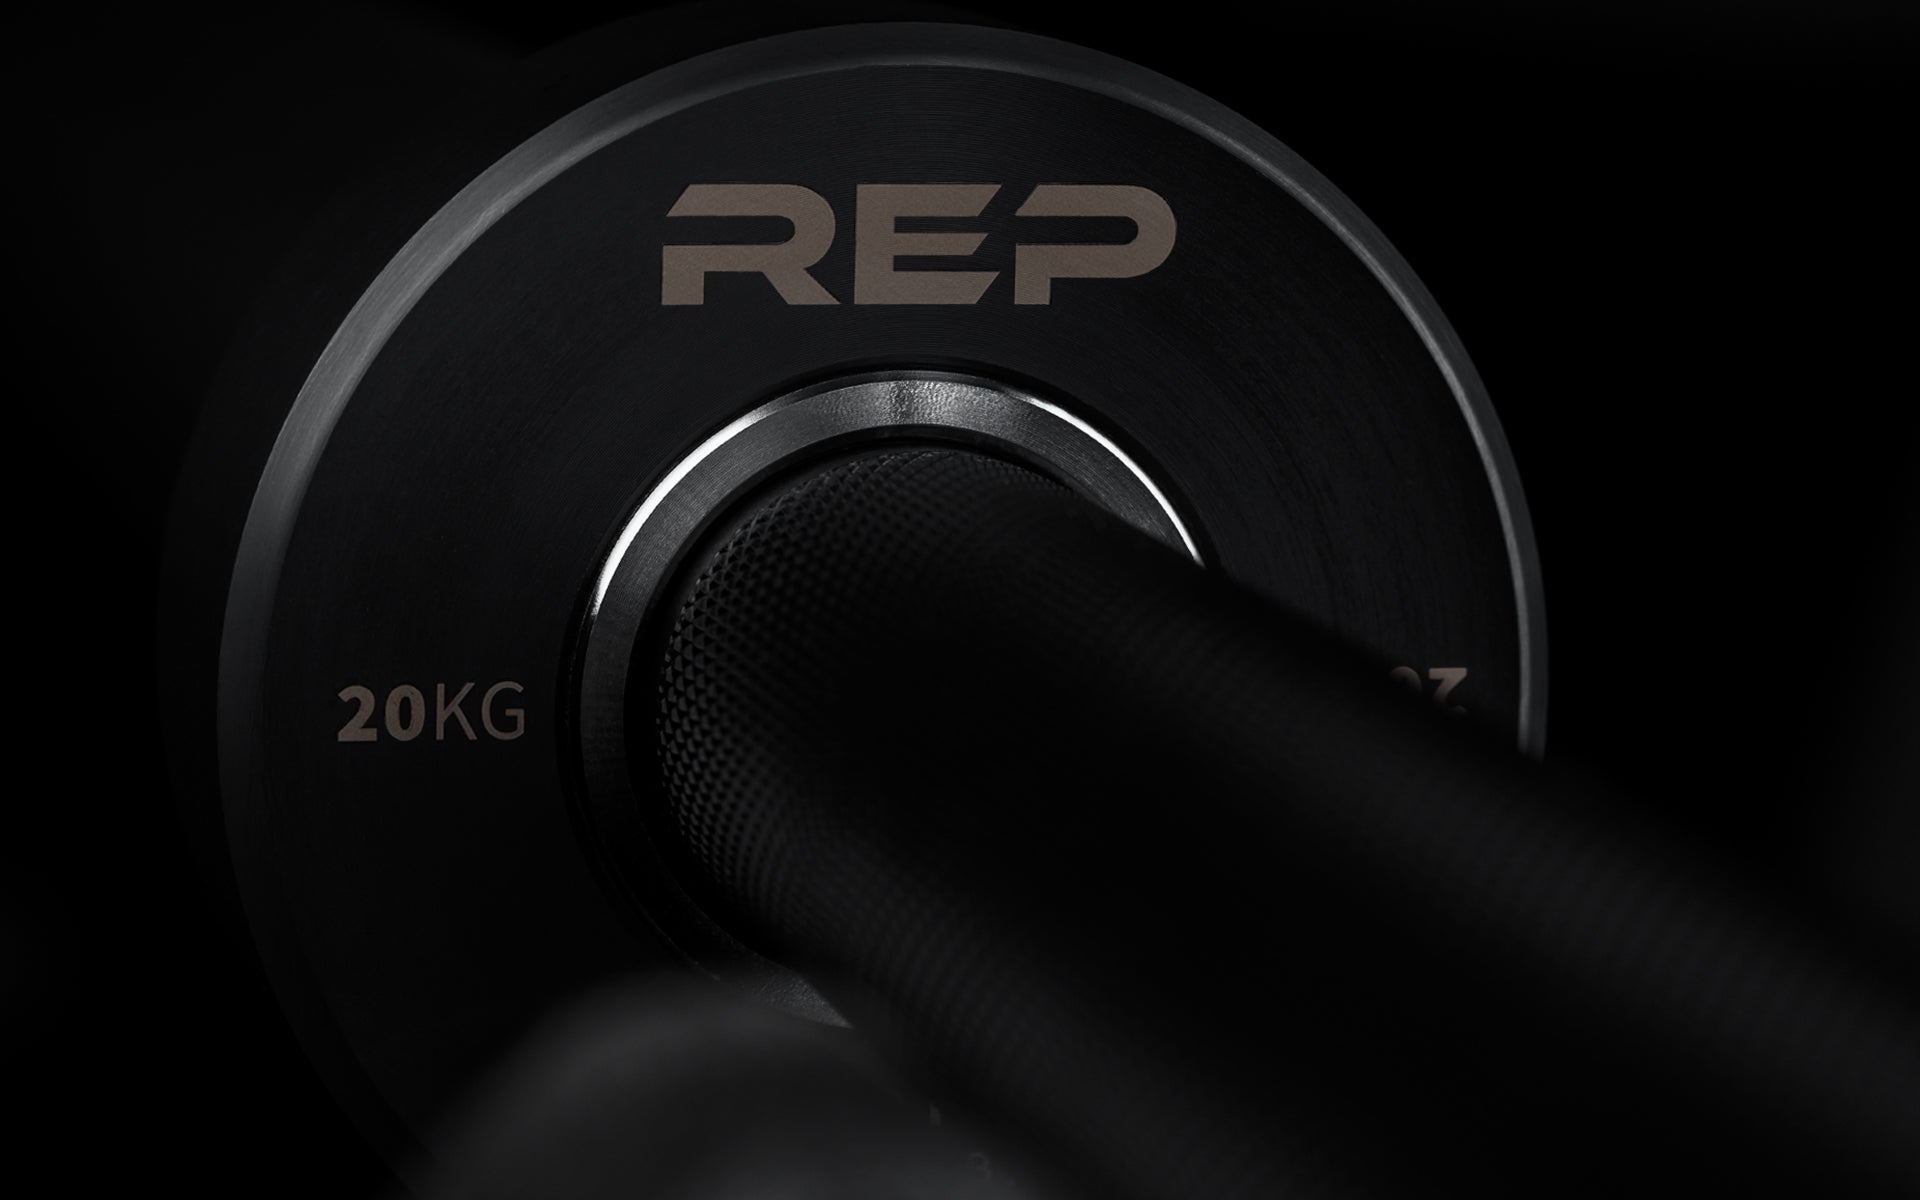 Close-up view of the REP logo and 20kg engraving on the inside part of the collar on a Black Cerakote Black Diamond Power Bar.